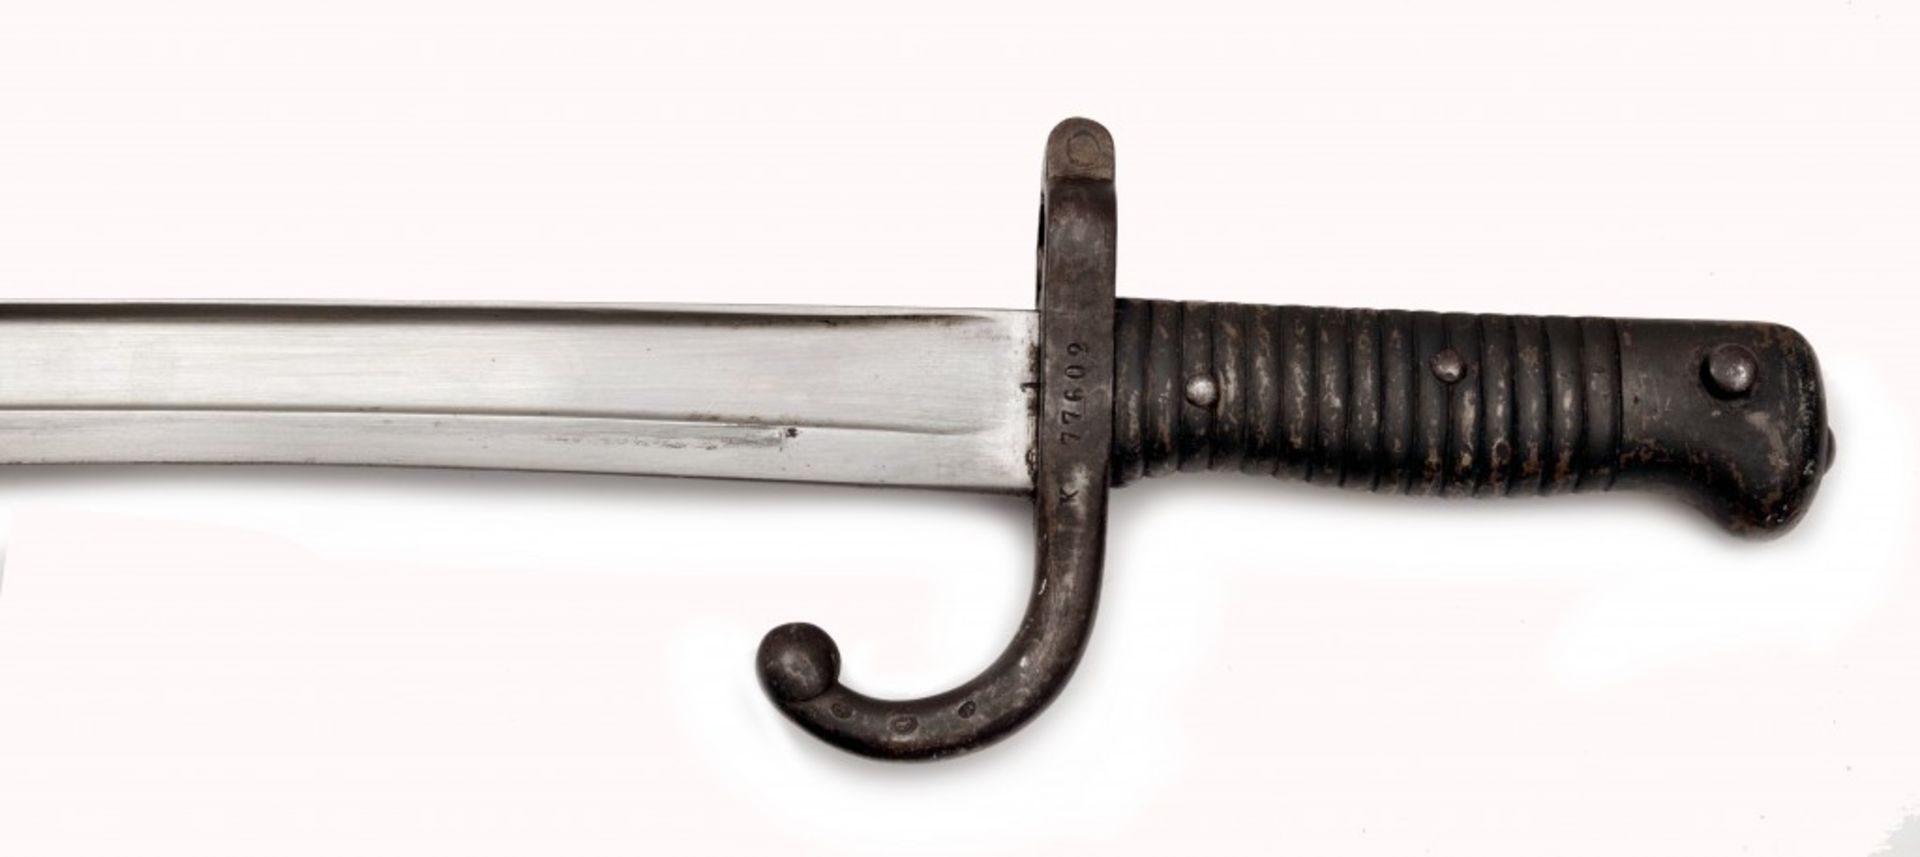 A Sword Bayonet for Chassepot Rifle Model 1866 - Image 2 of 4